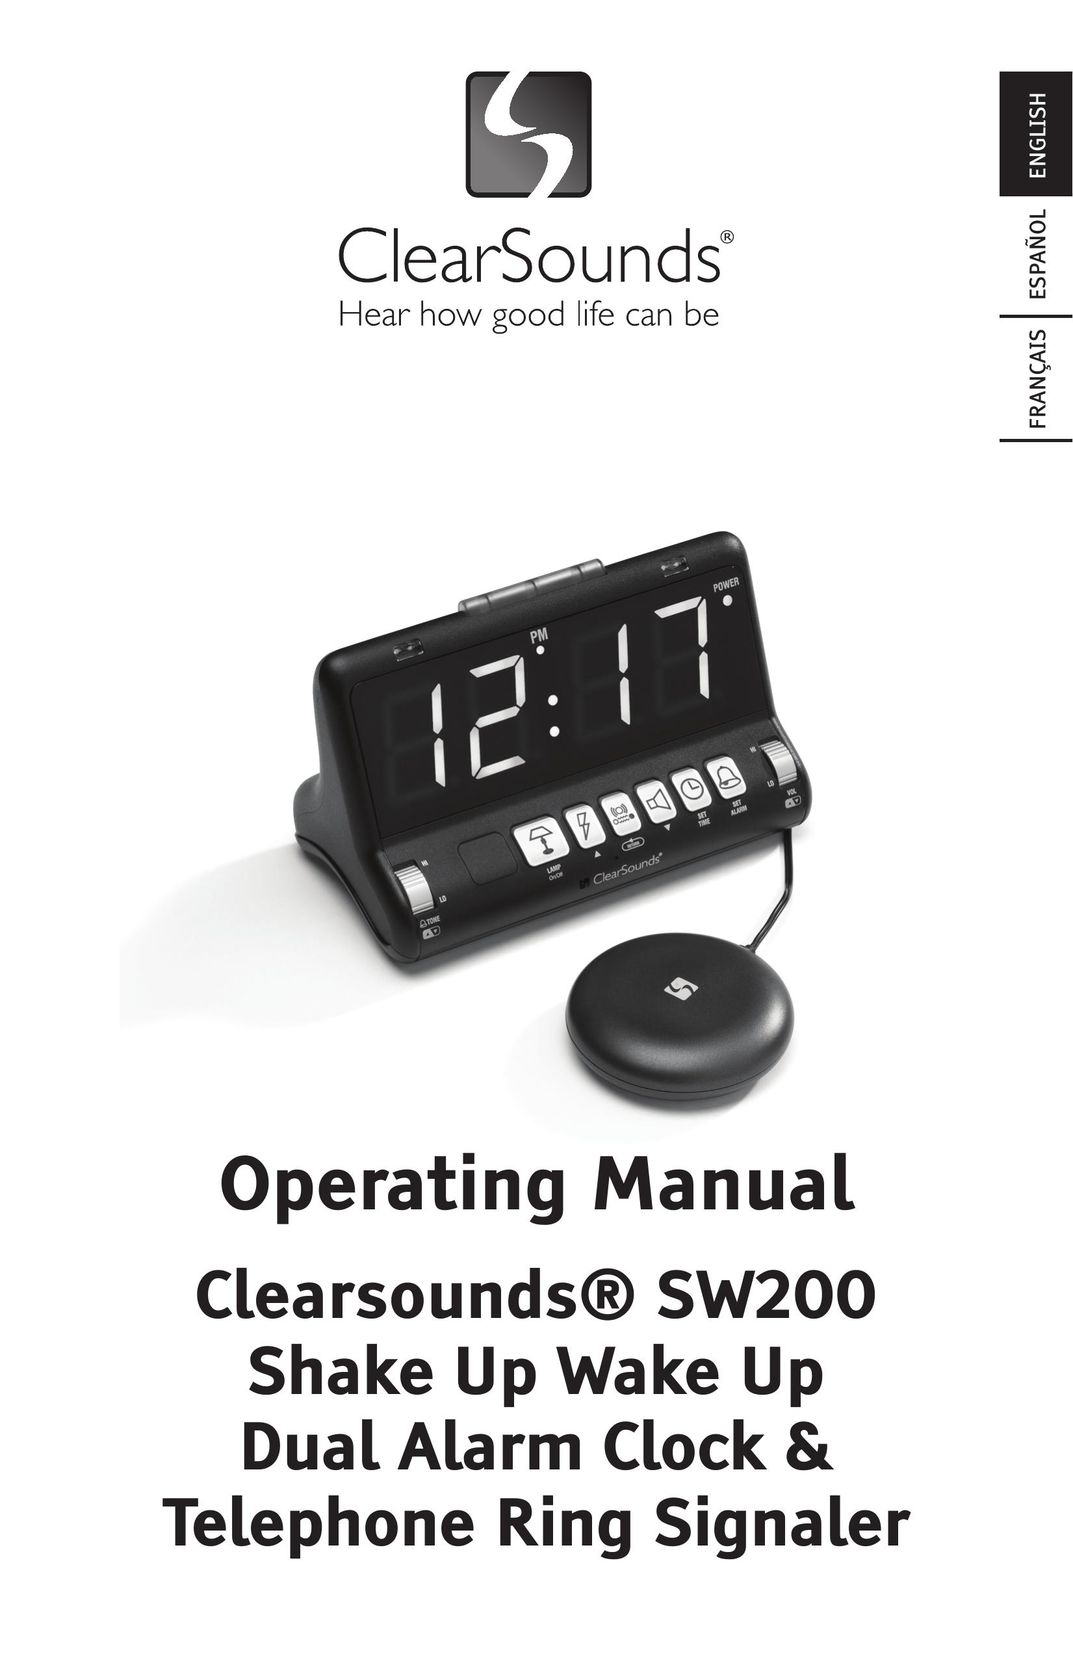 ClearSounds SW200 Clock User Manual